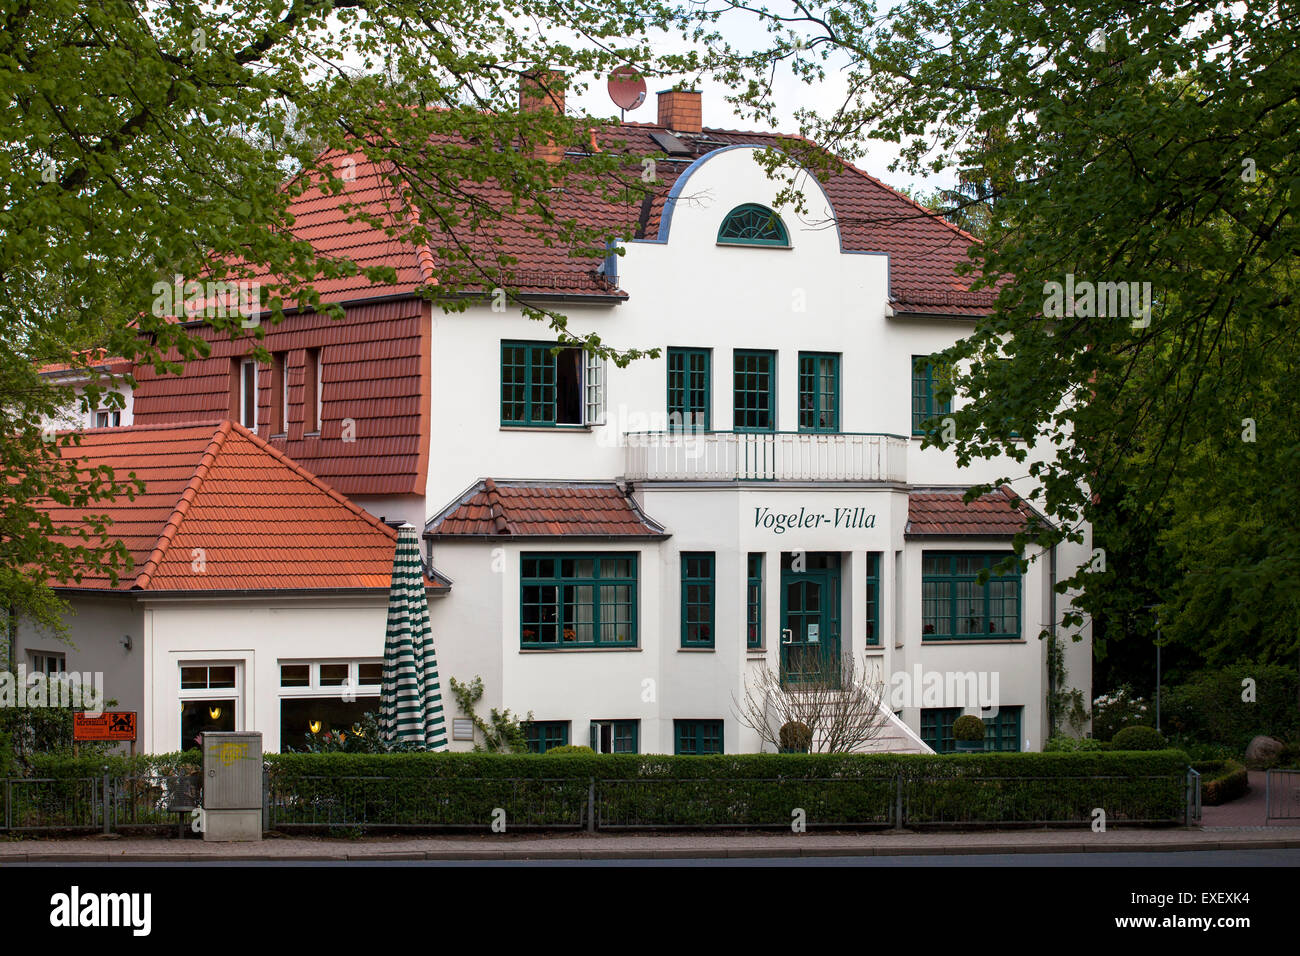 Europe, Germany, Lower Saxony, Worpswede, the Vogeler-Villa, built by Heinrich Vogeler, today an old people's home.  Europa, Deu Stock Photo